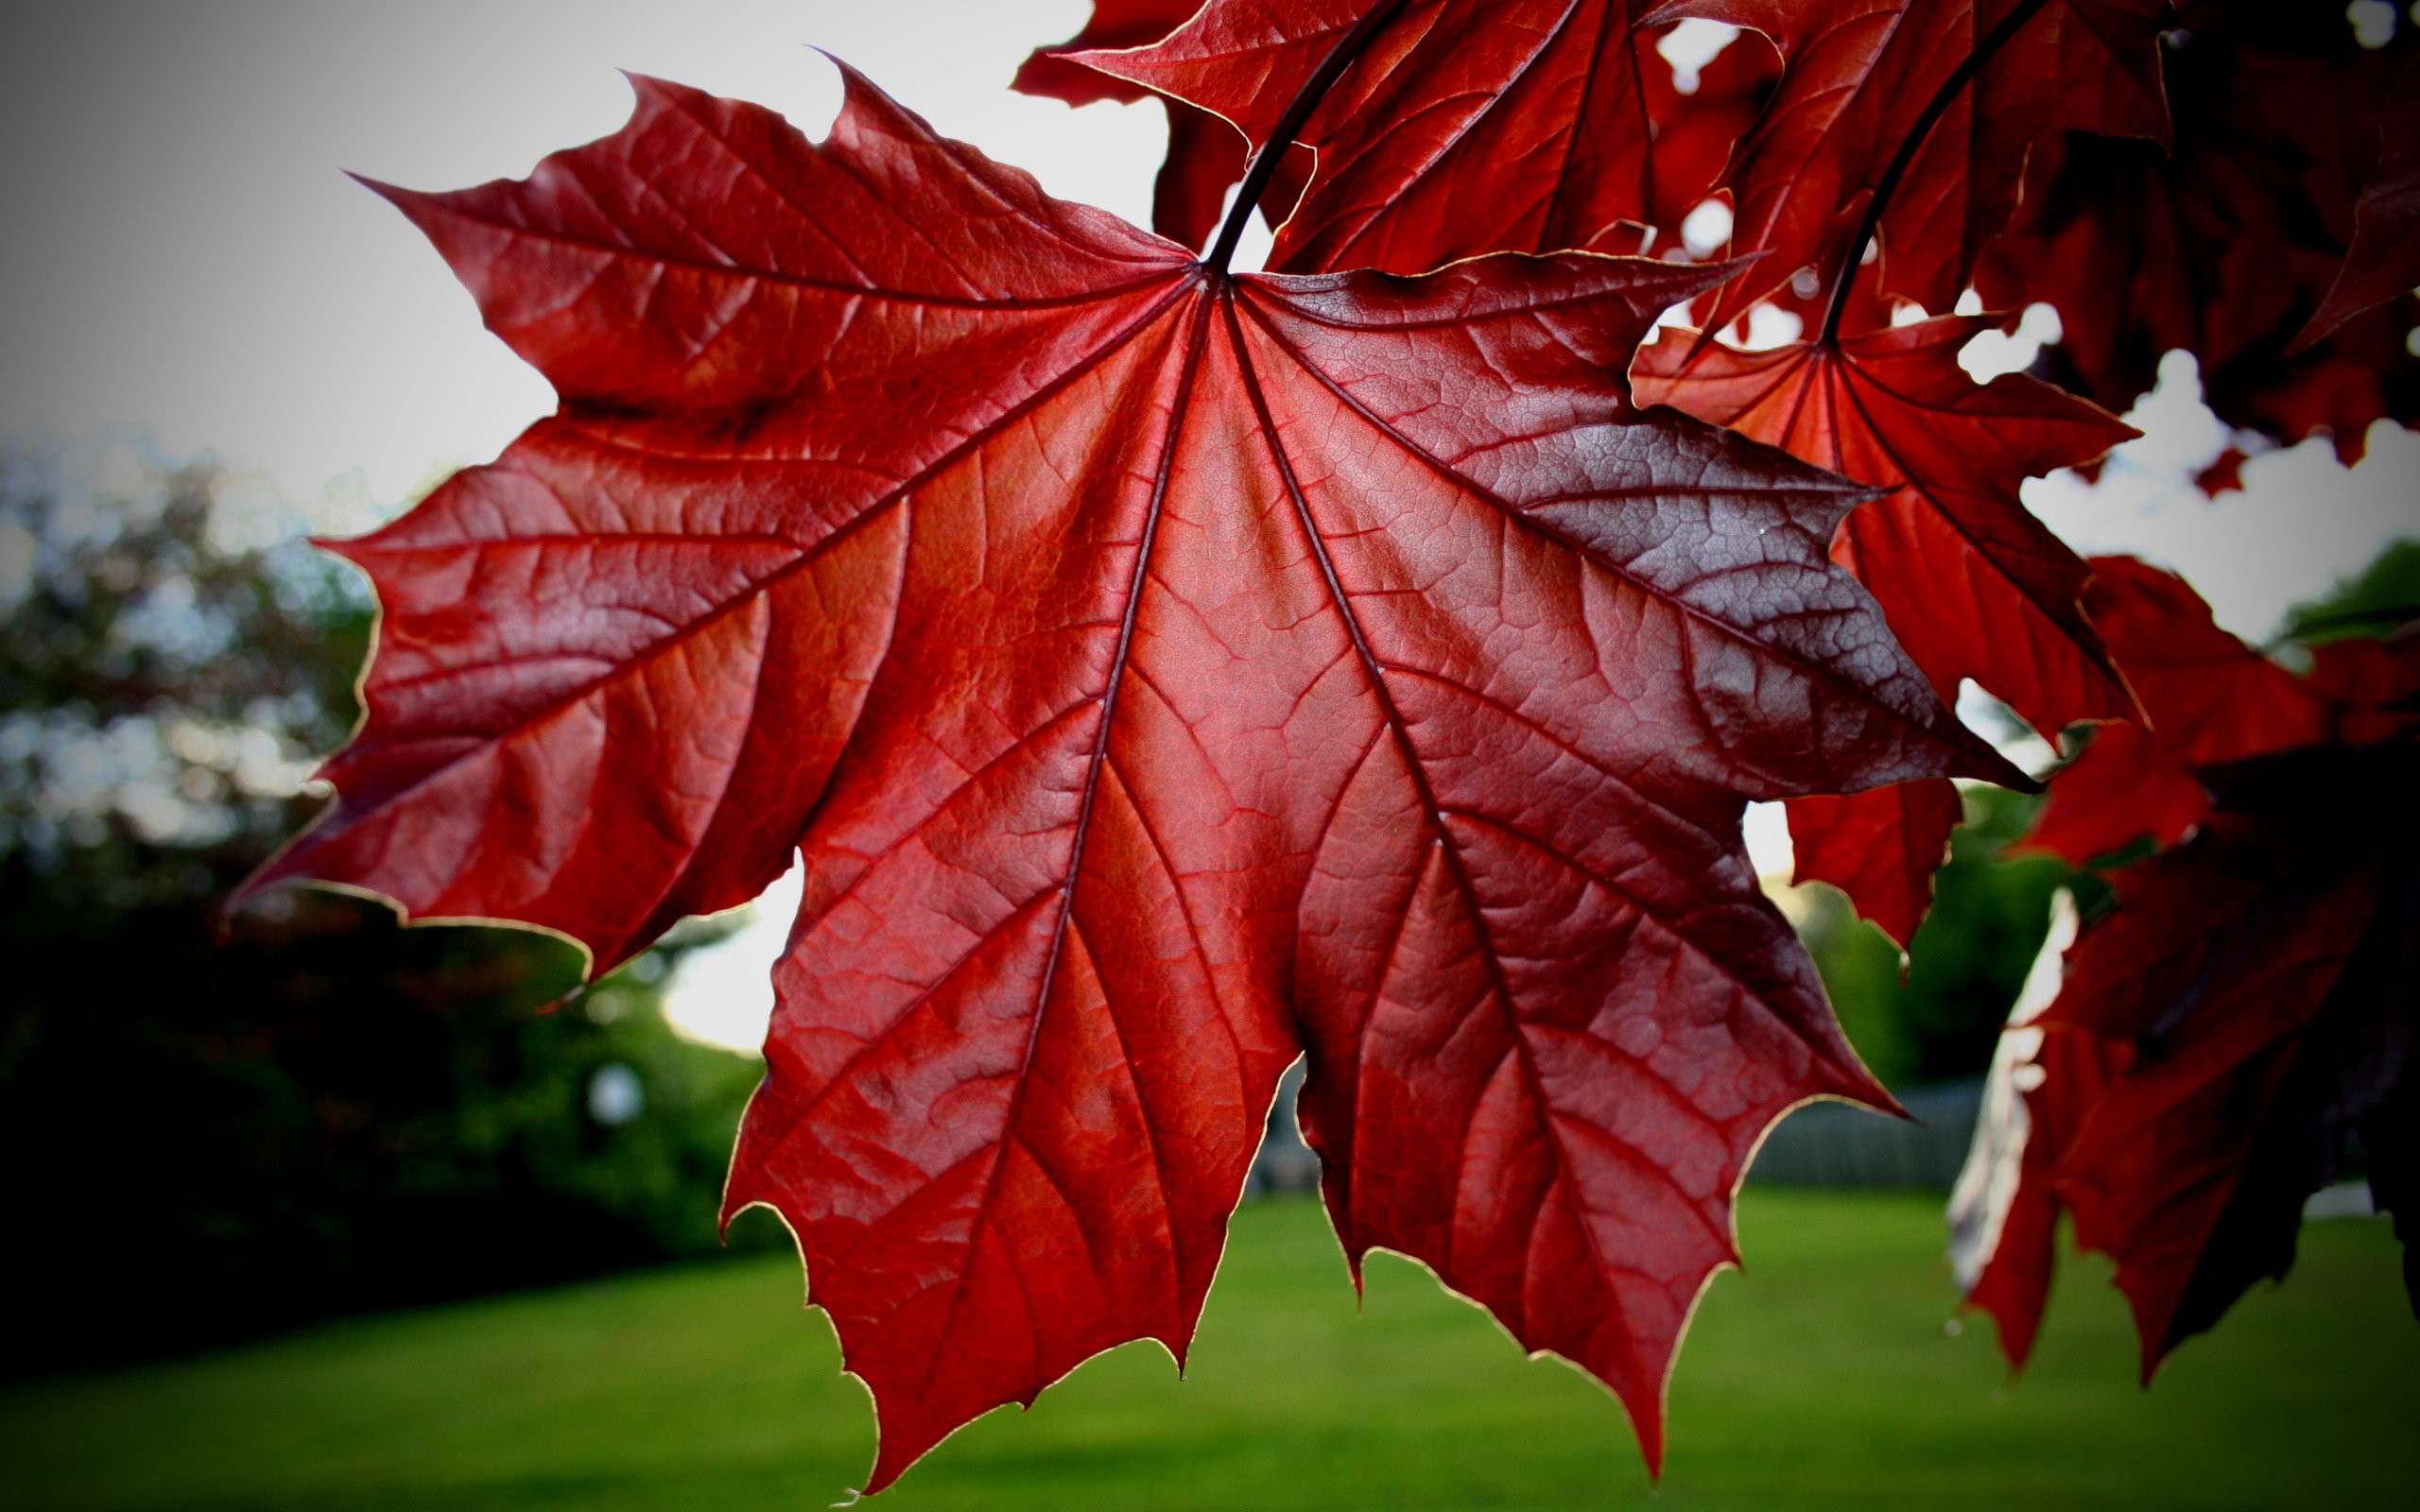 Maple Leaf Picture - Wallpaper, High Definition, High Quality, Widescreen